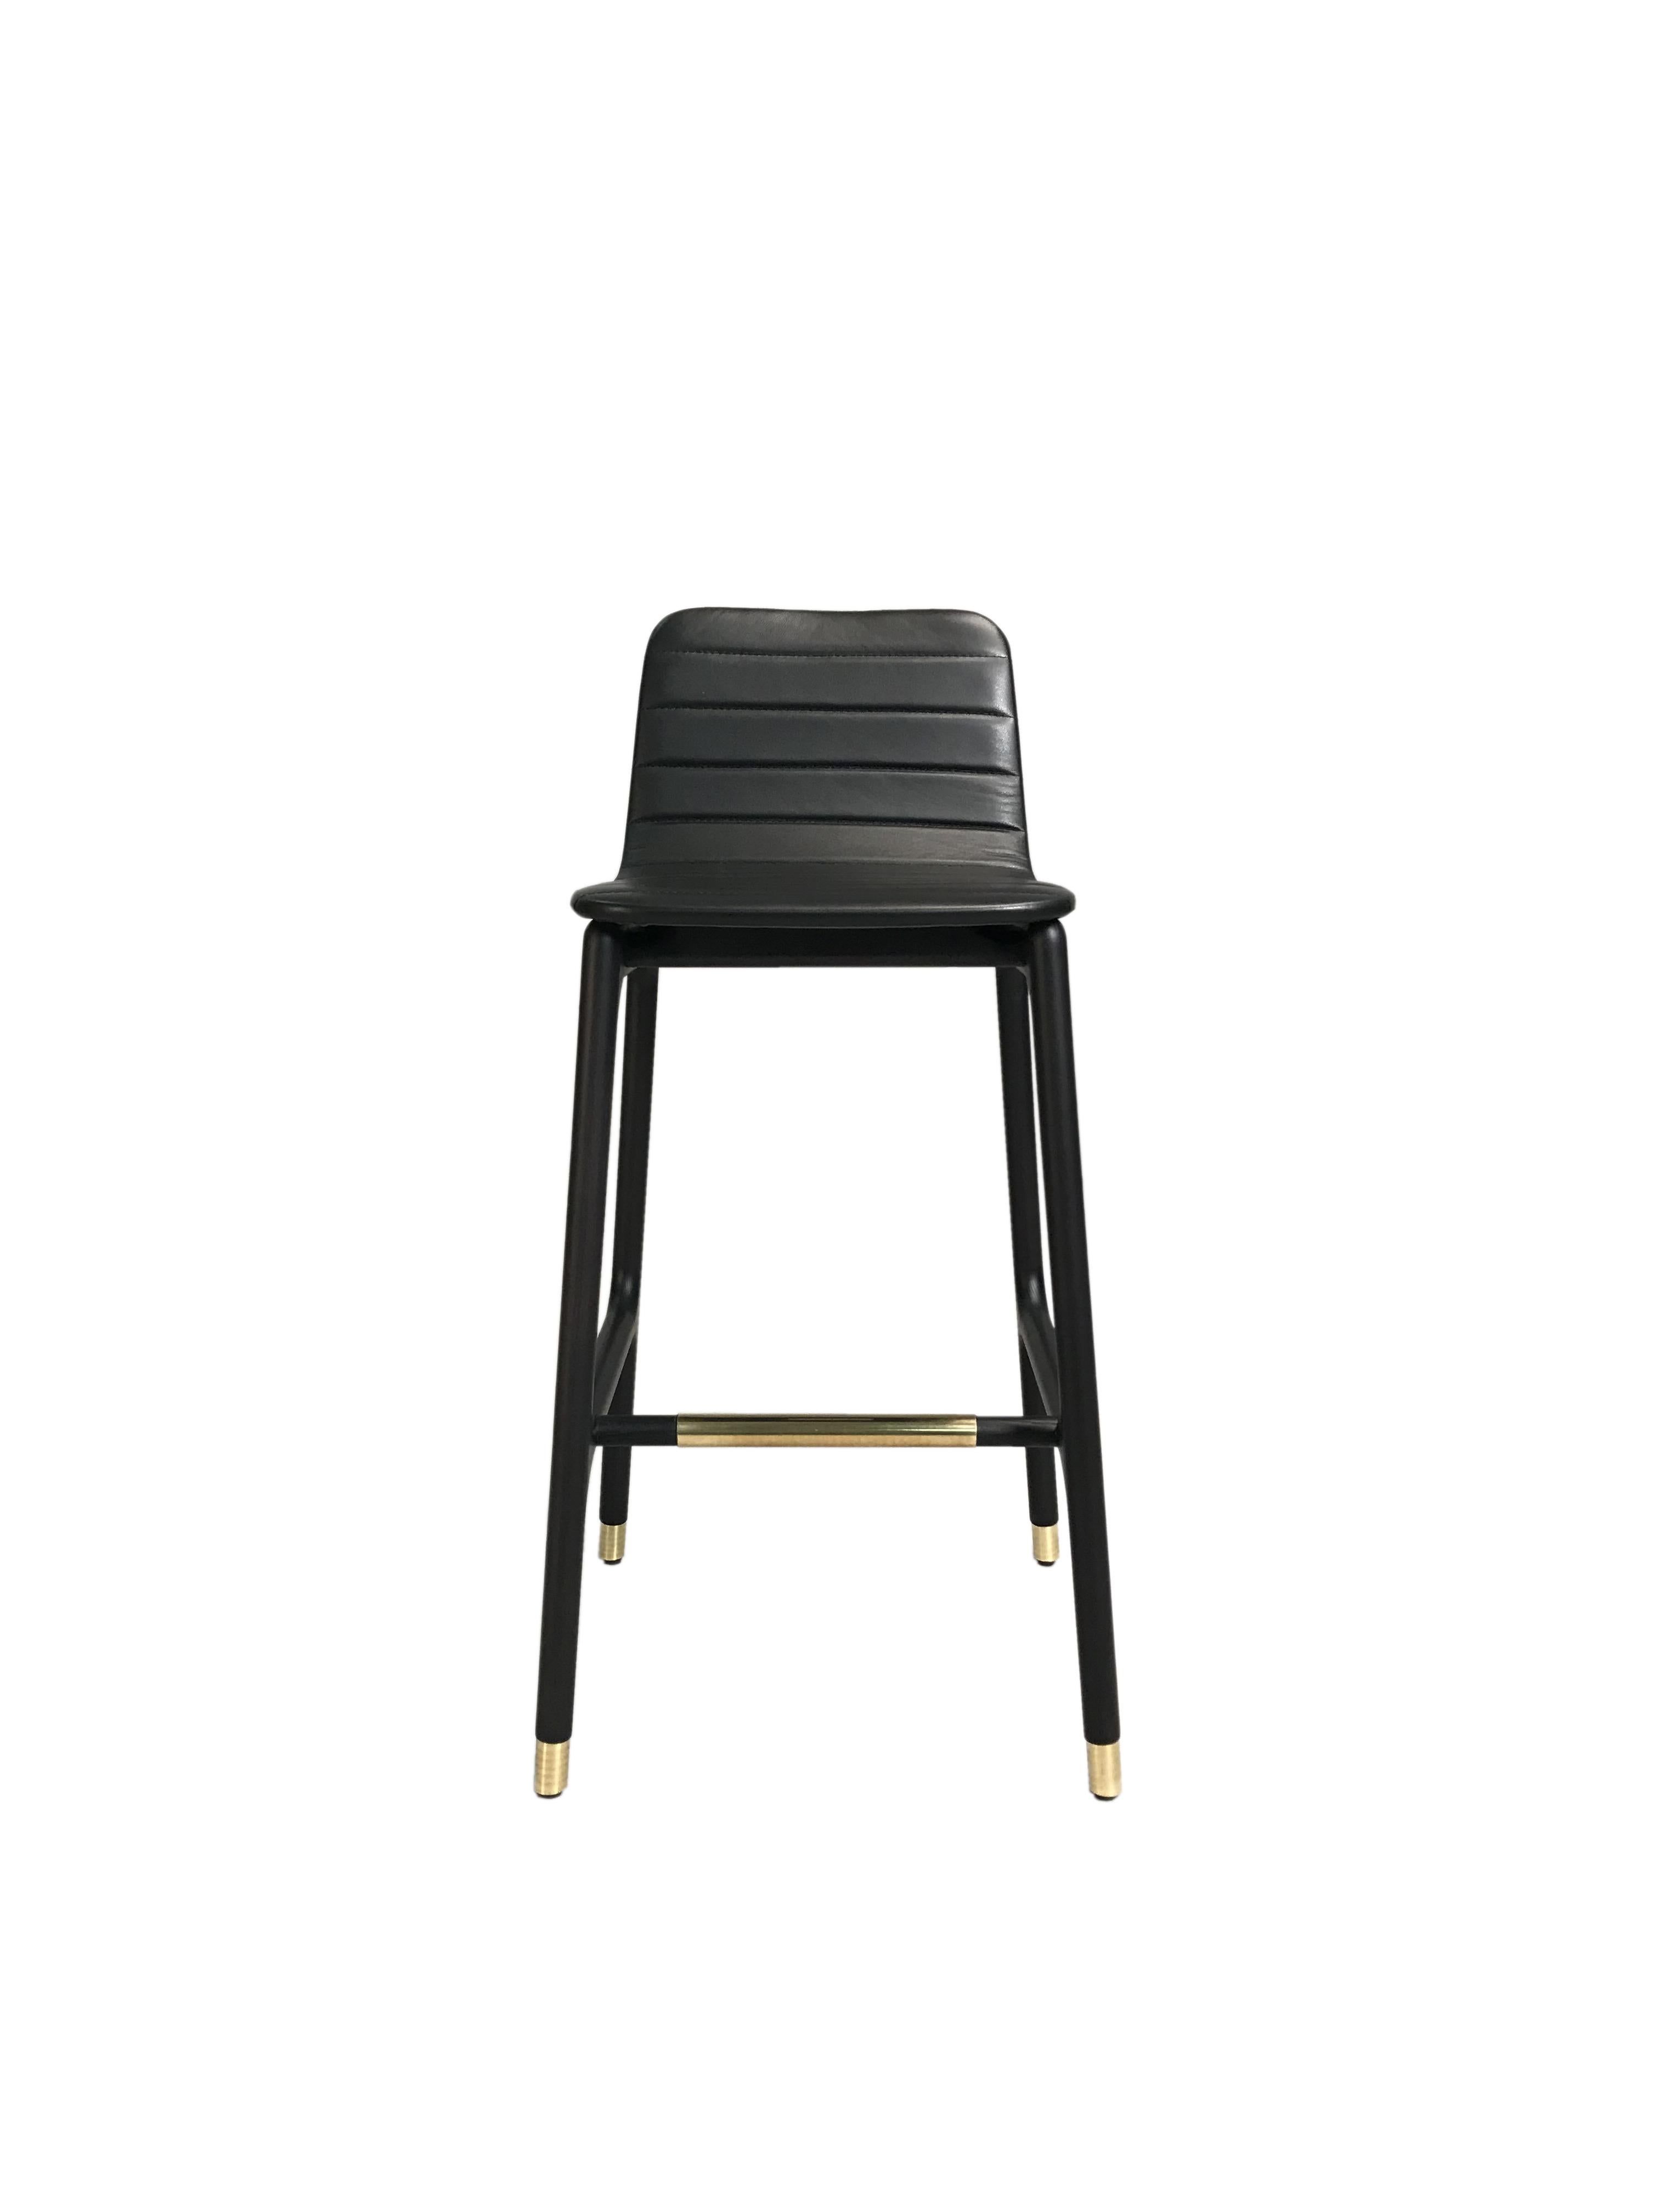 Contemporary style Joyce bar stool made of ashwood with leather or fabrics upholstered seat, and brass footrest.
Designed by Libero Rutilo.
Available in different heights, from 60 to 80 cm
Made in Italy by Morelato